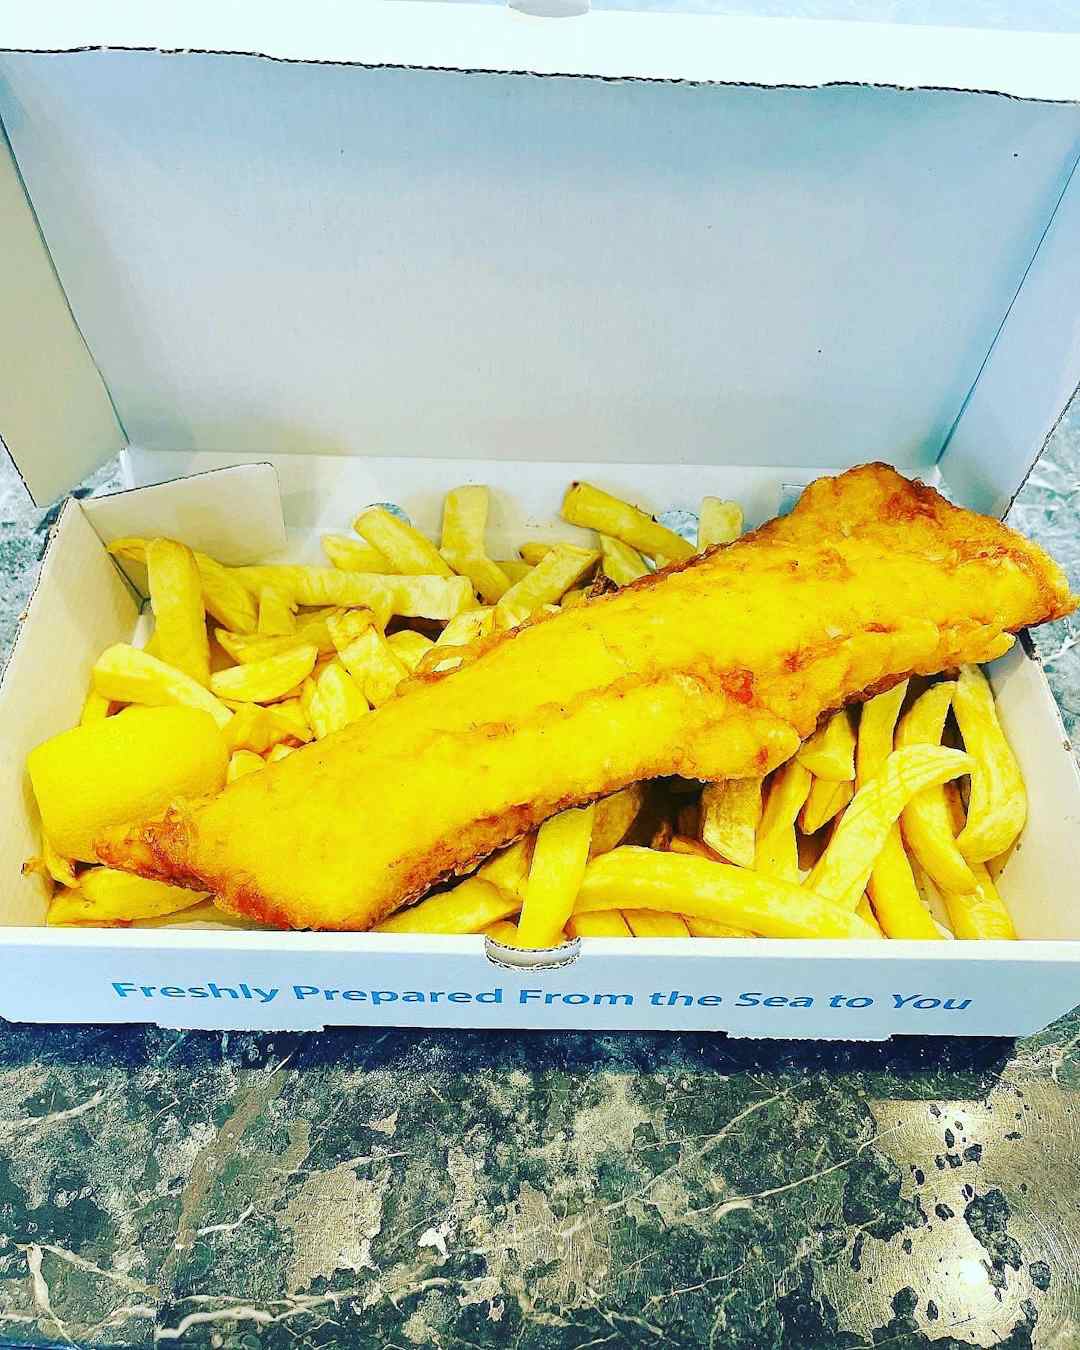 Hero image for supplier FishMyChips